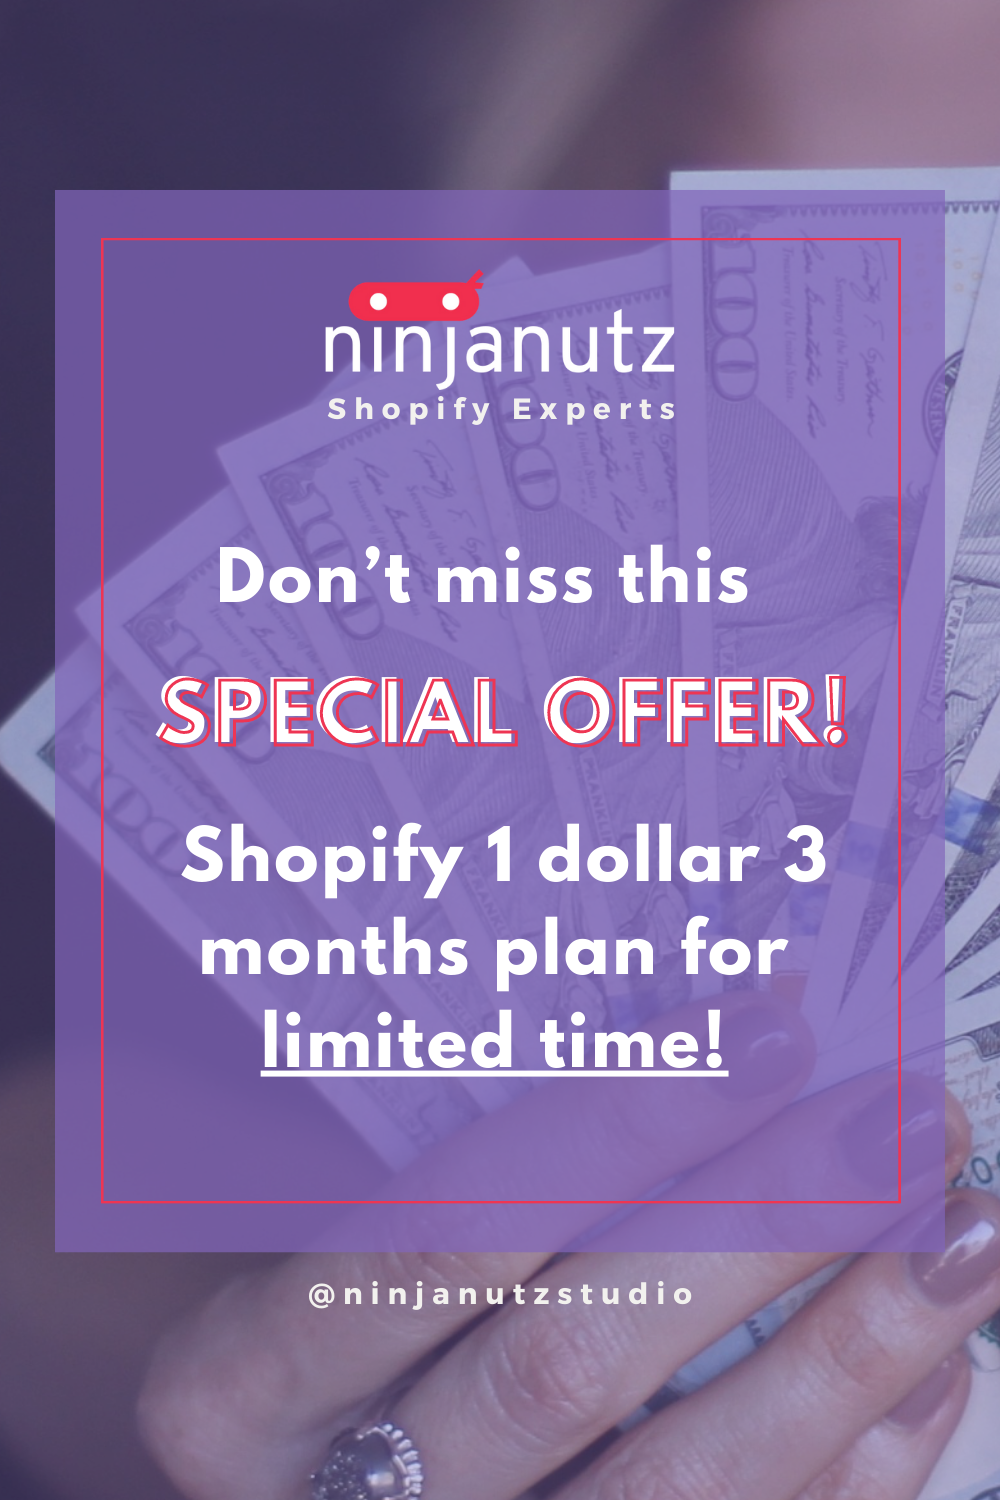 Don’t miss this! Shopify 1 dollar 3 months plan for limited time! NinjaNutz®